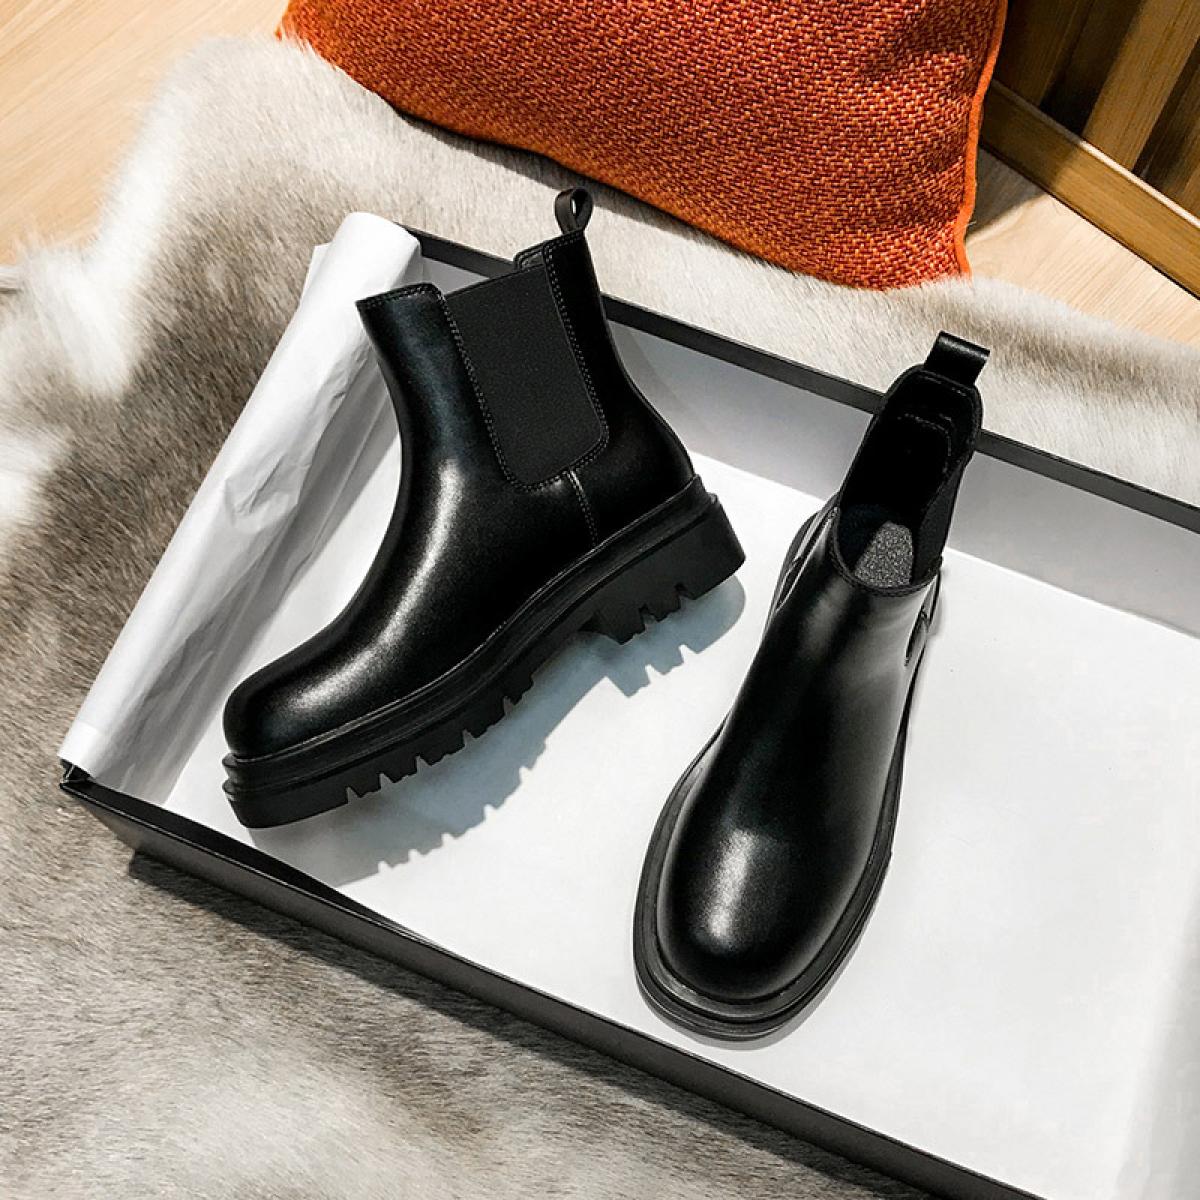 Famous Brand Chelsea Boots For Women Casual Black Platform Shoes Ladies Cow Leather Boot Sweet Girls Ankle Botas Bottine